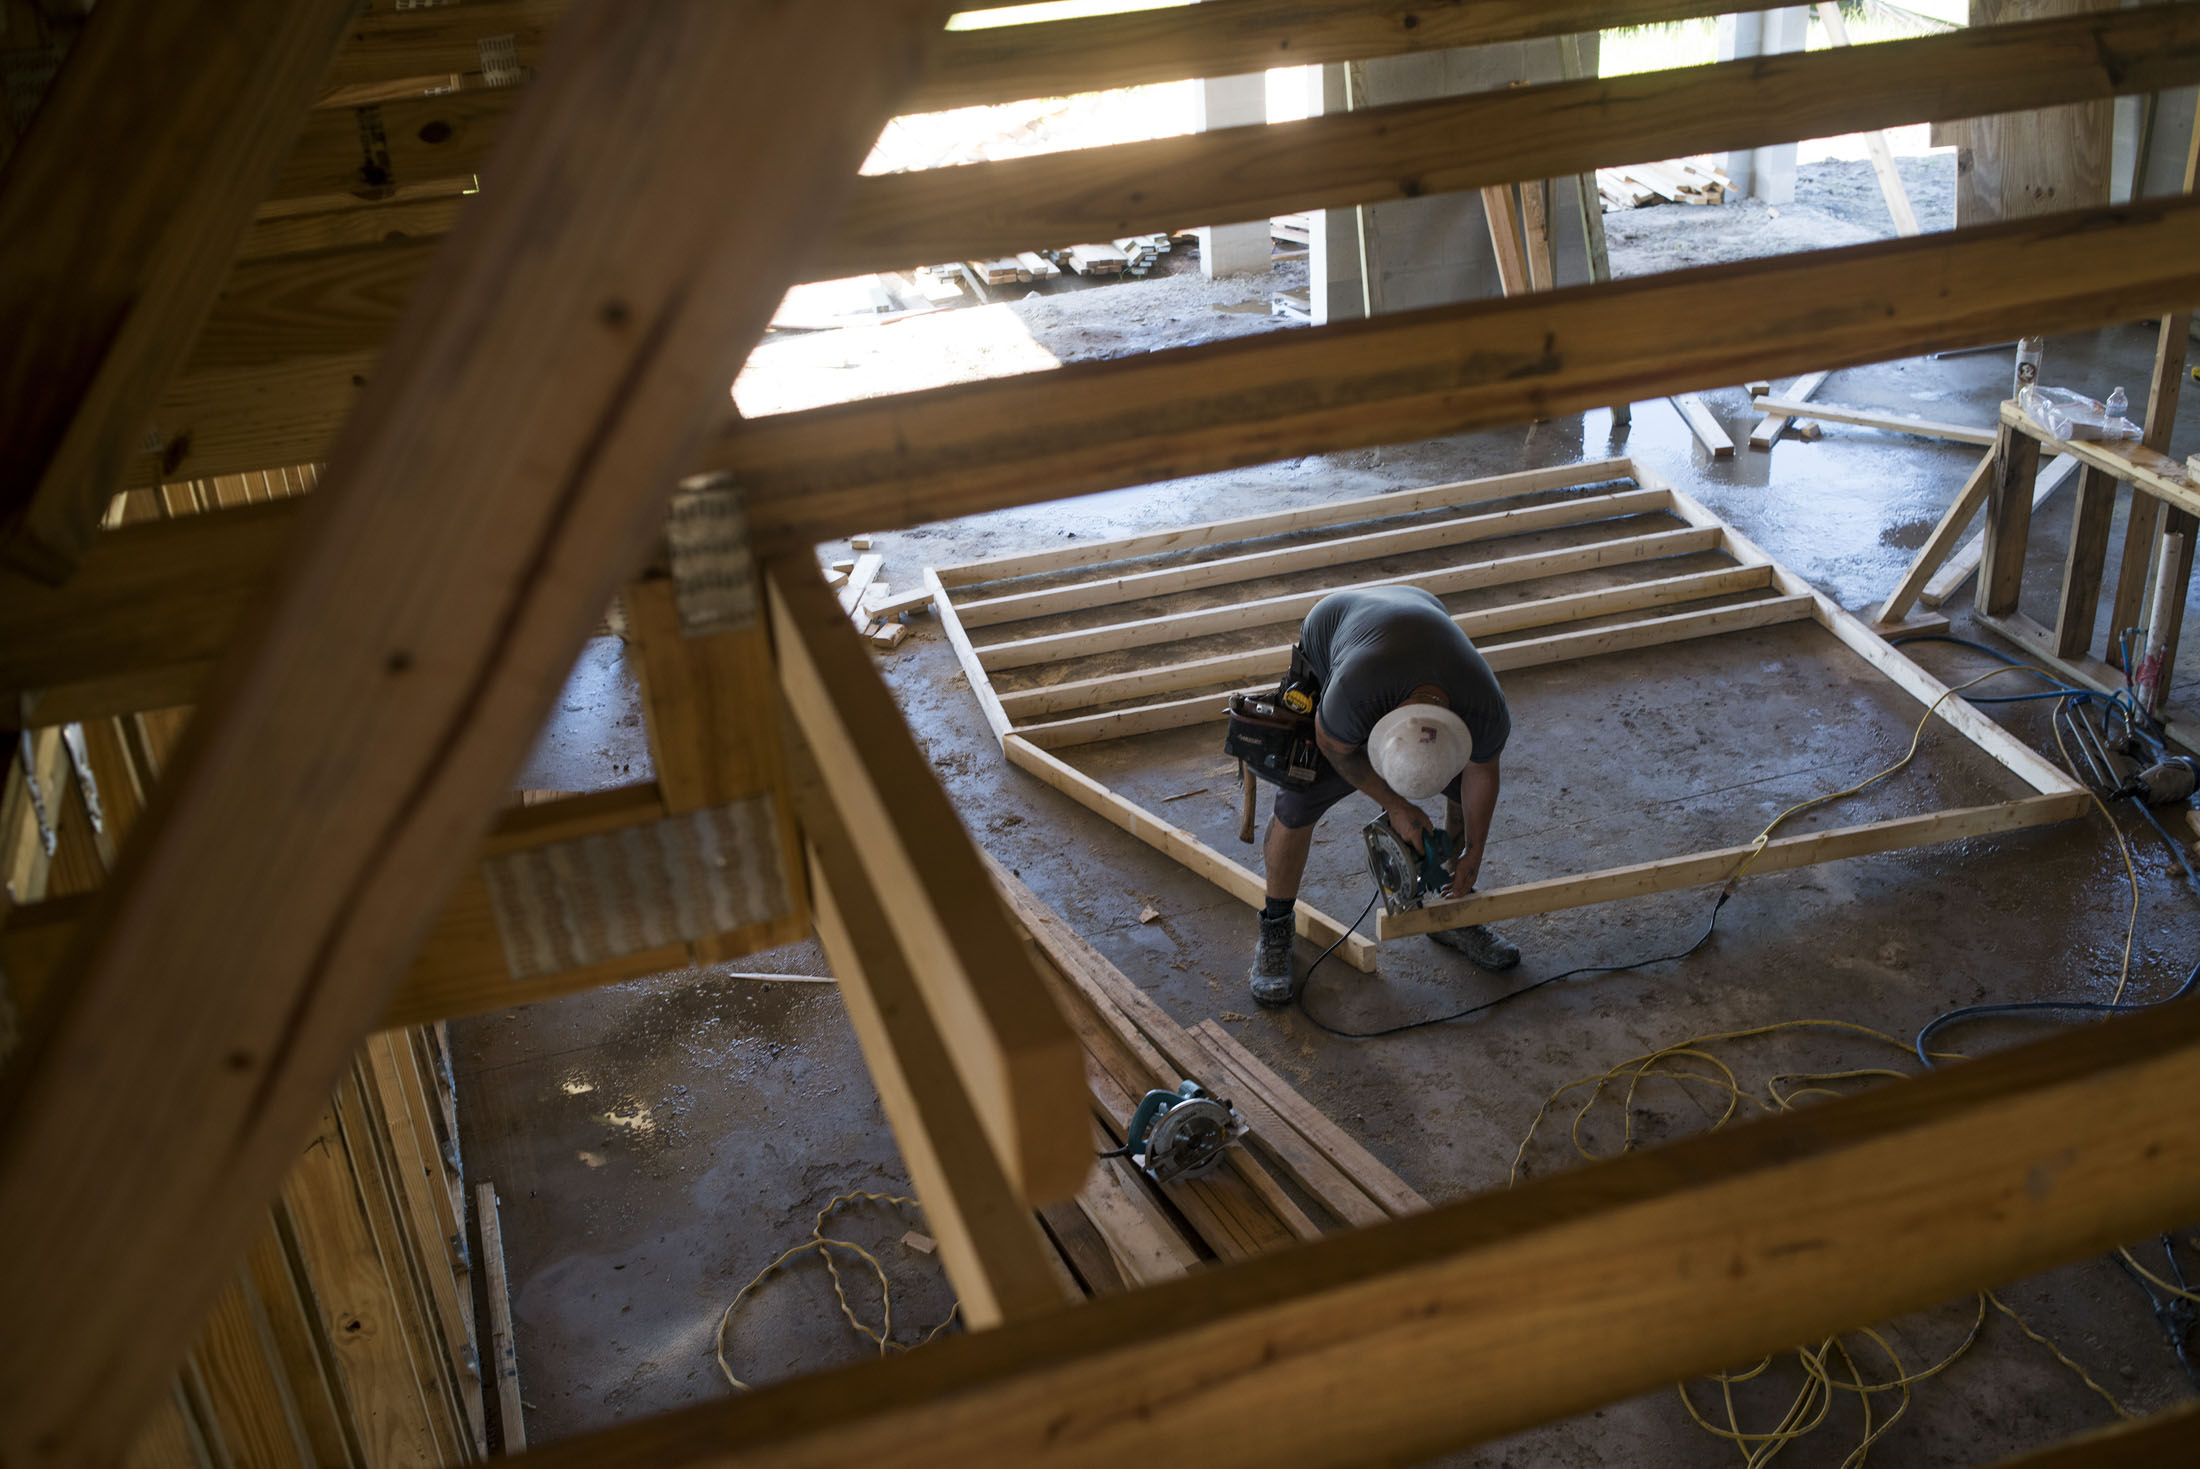 A worker saws a section of lumber inside a home under construction in Ellenton, Florida, U.S., on Thursday, July 6, 2017.